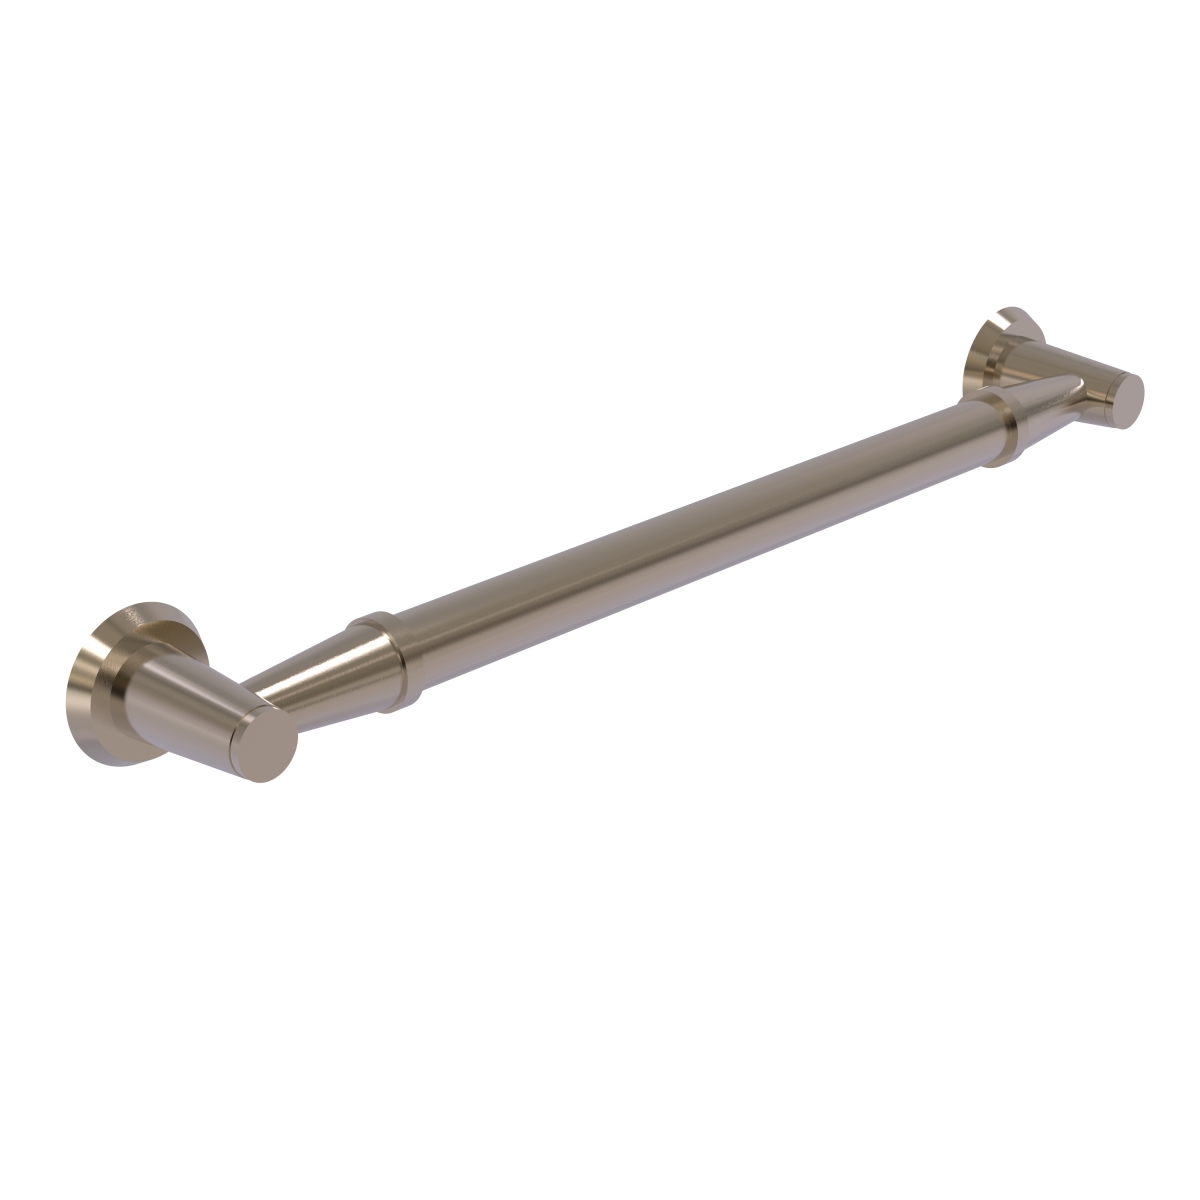 Picture of Allied Brass MD-GRS-16-PEW 16 in. Grab Bar Smooth, Antique Pewter - 3.5 x 18 x 16 in.